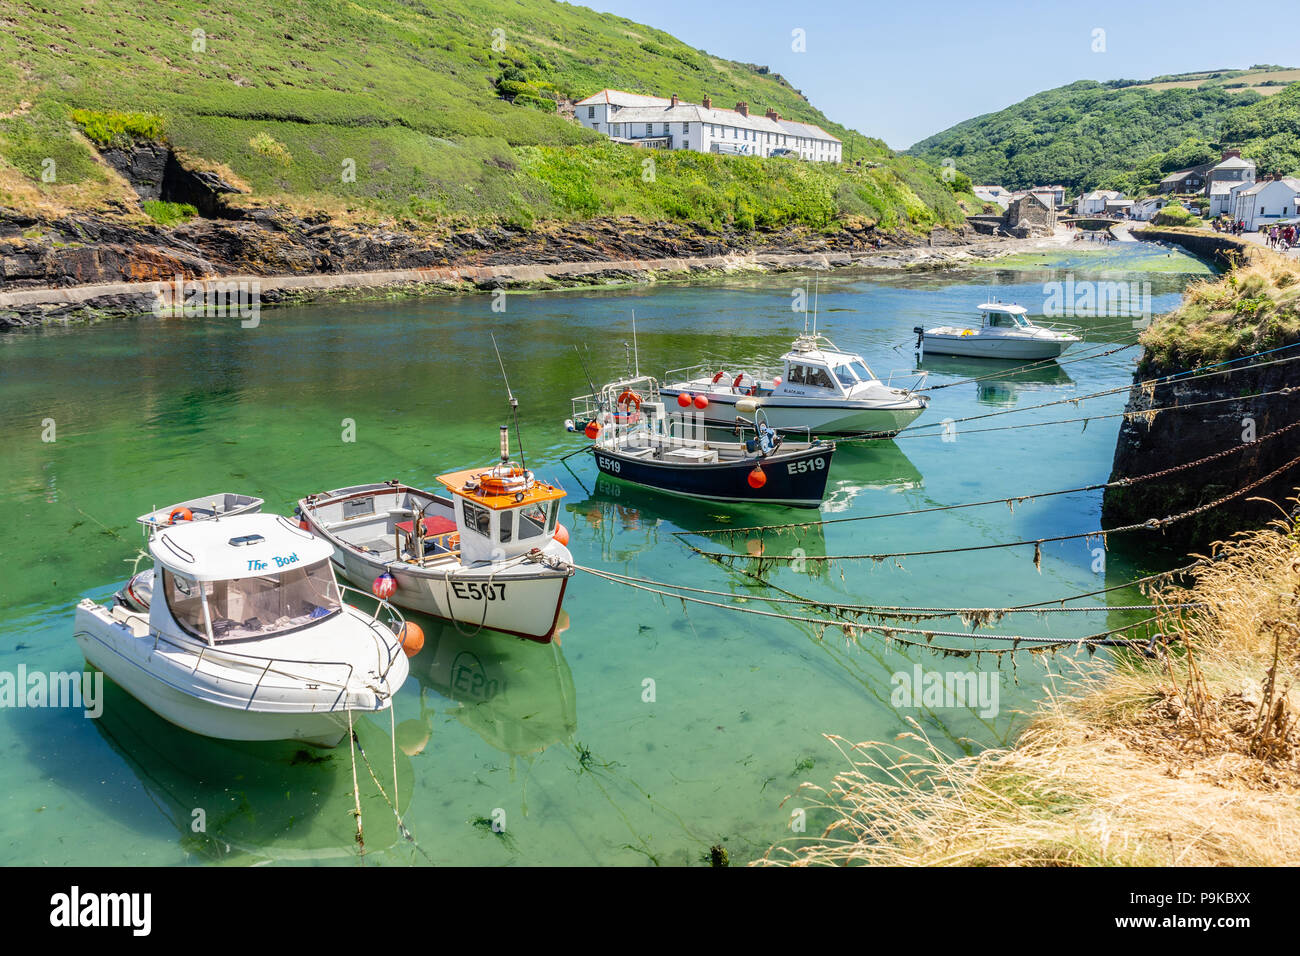 View of Boscastle with boats moored along the small harbour in summer 2018, Boscastle, North Cornwall, Cornwall, England, UK Stock Photo